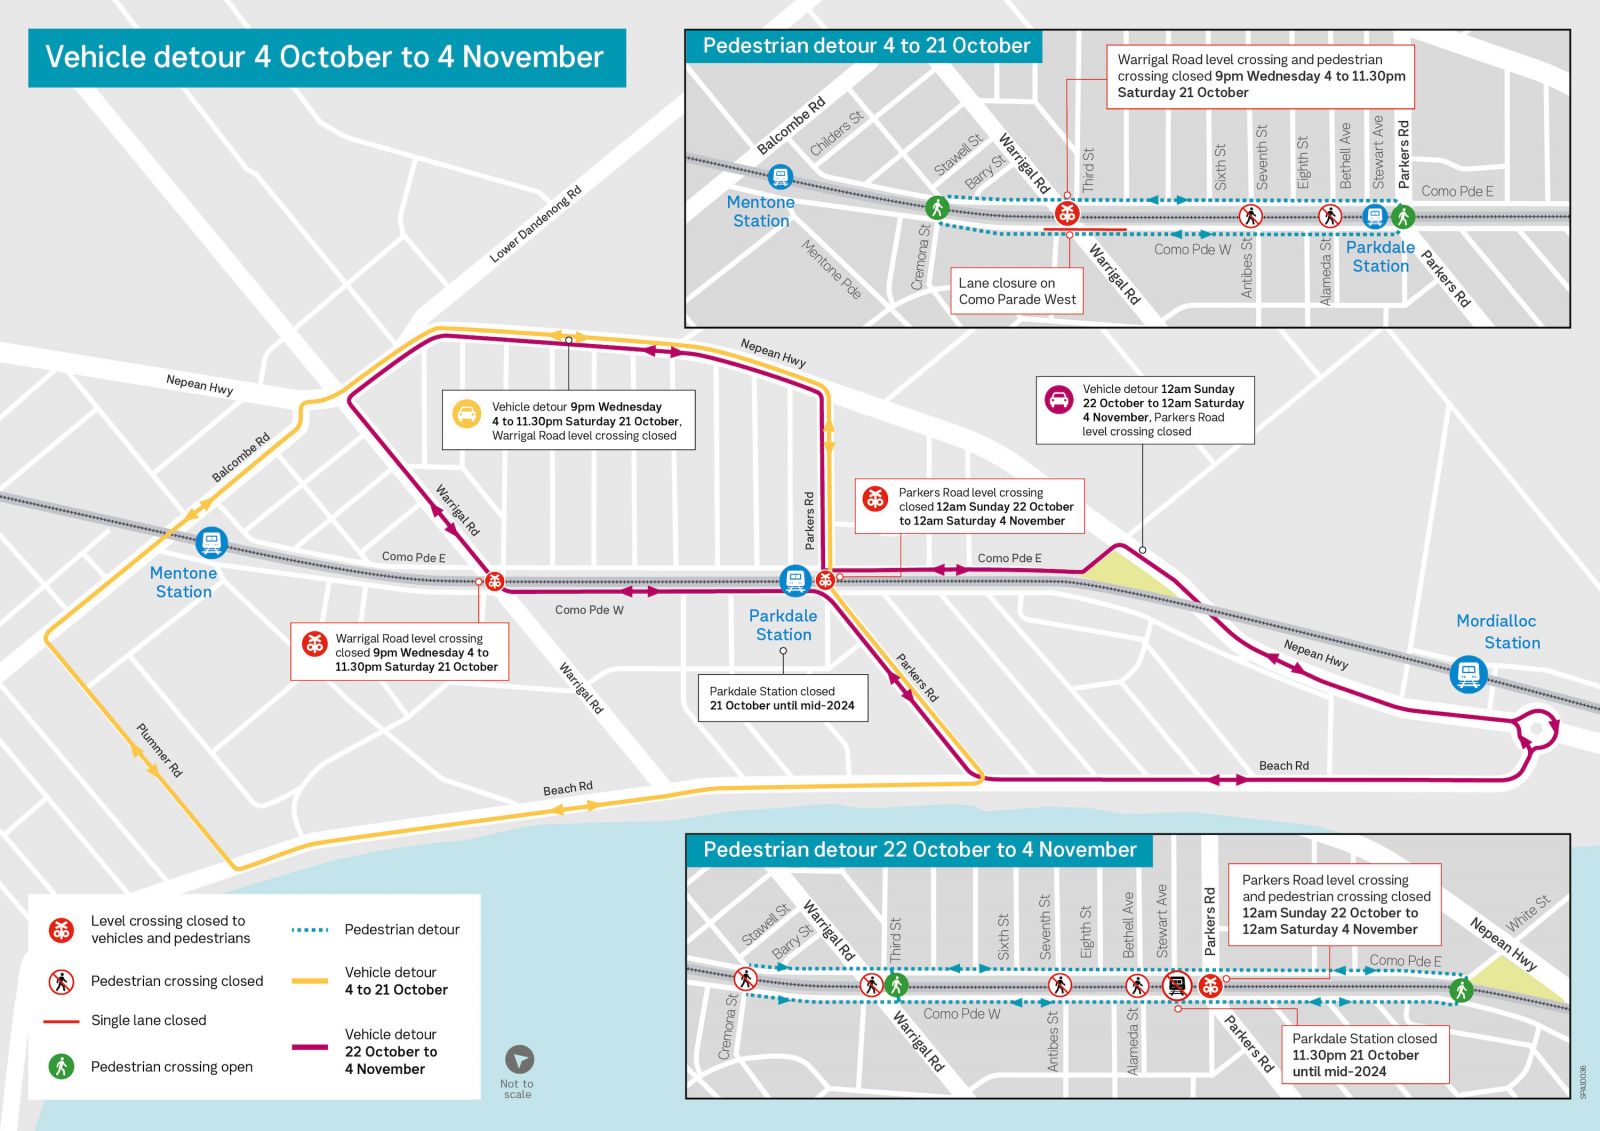 Map showing detours from Wednesday 4 October until Saturday 4 November.